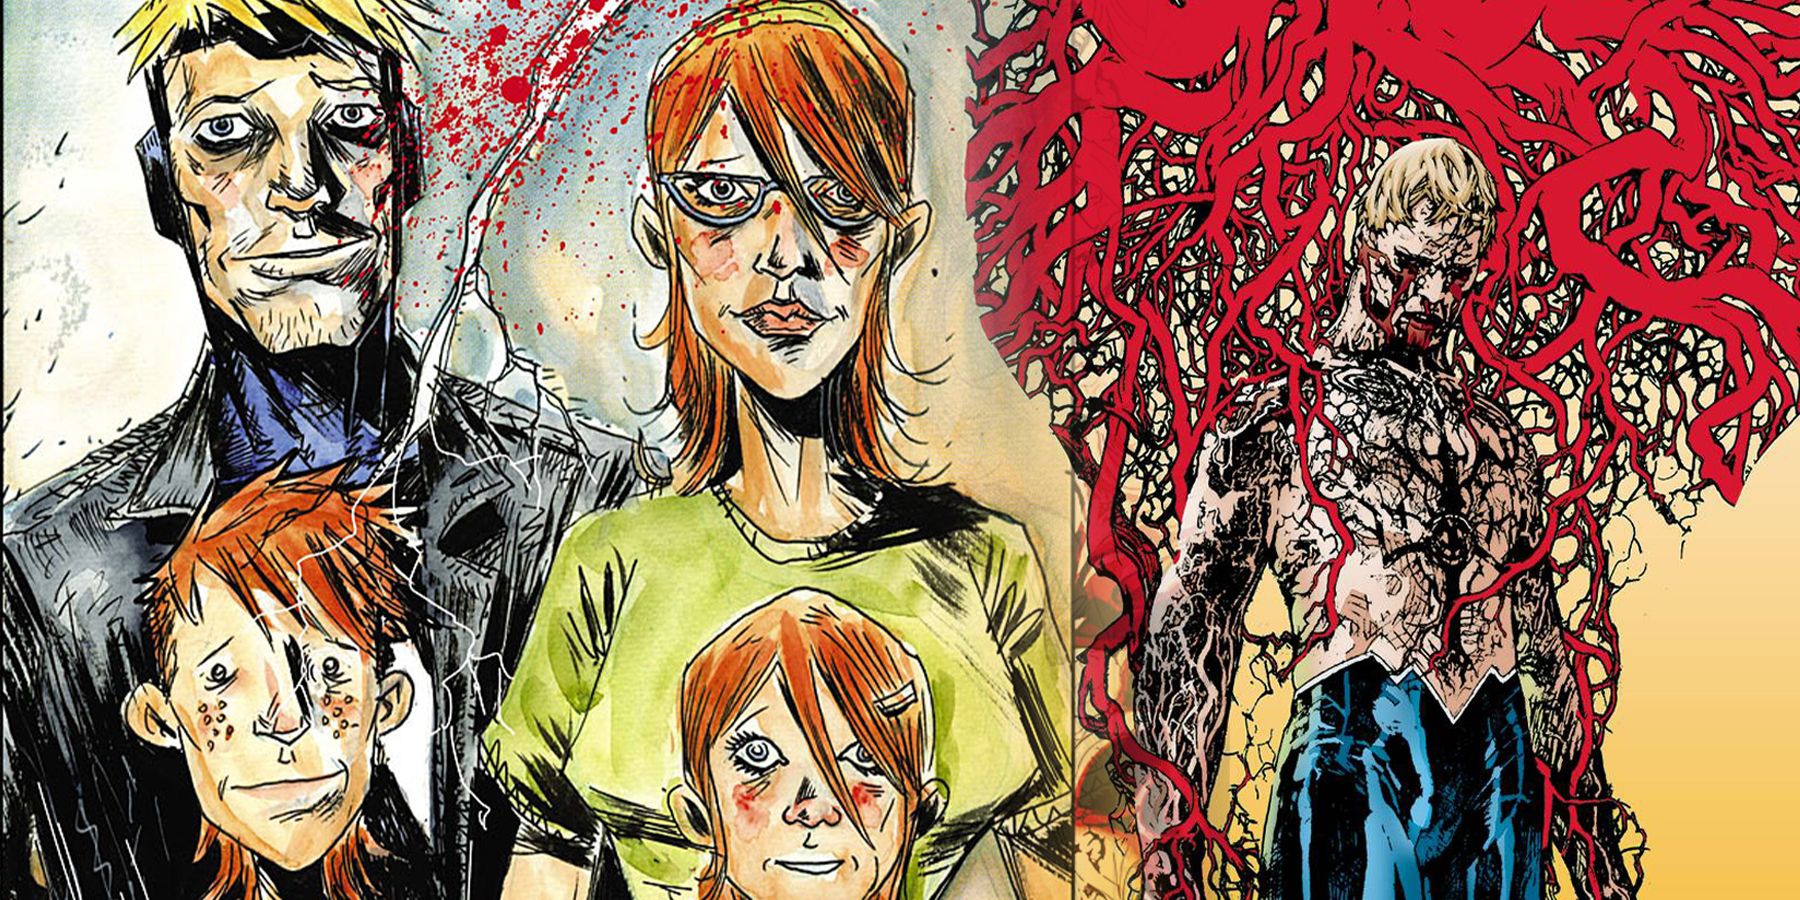 Animal Man Works Perfectly in James Gunn's DCU - And Jeff Lemire's Run Proves it